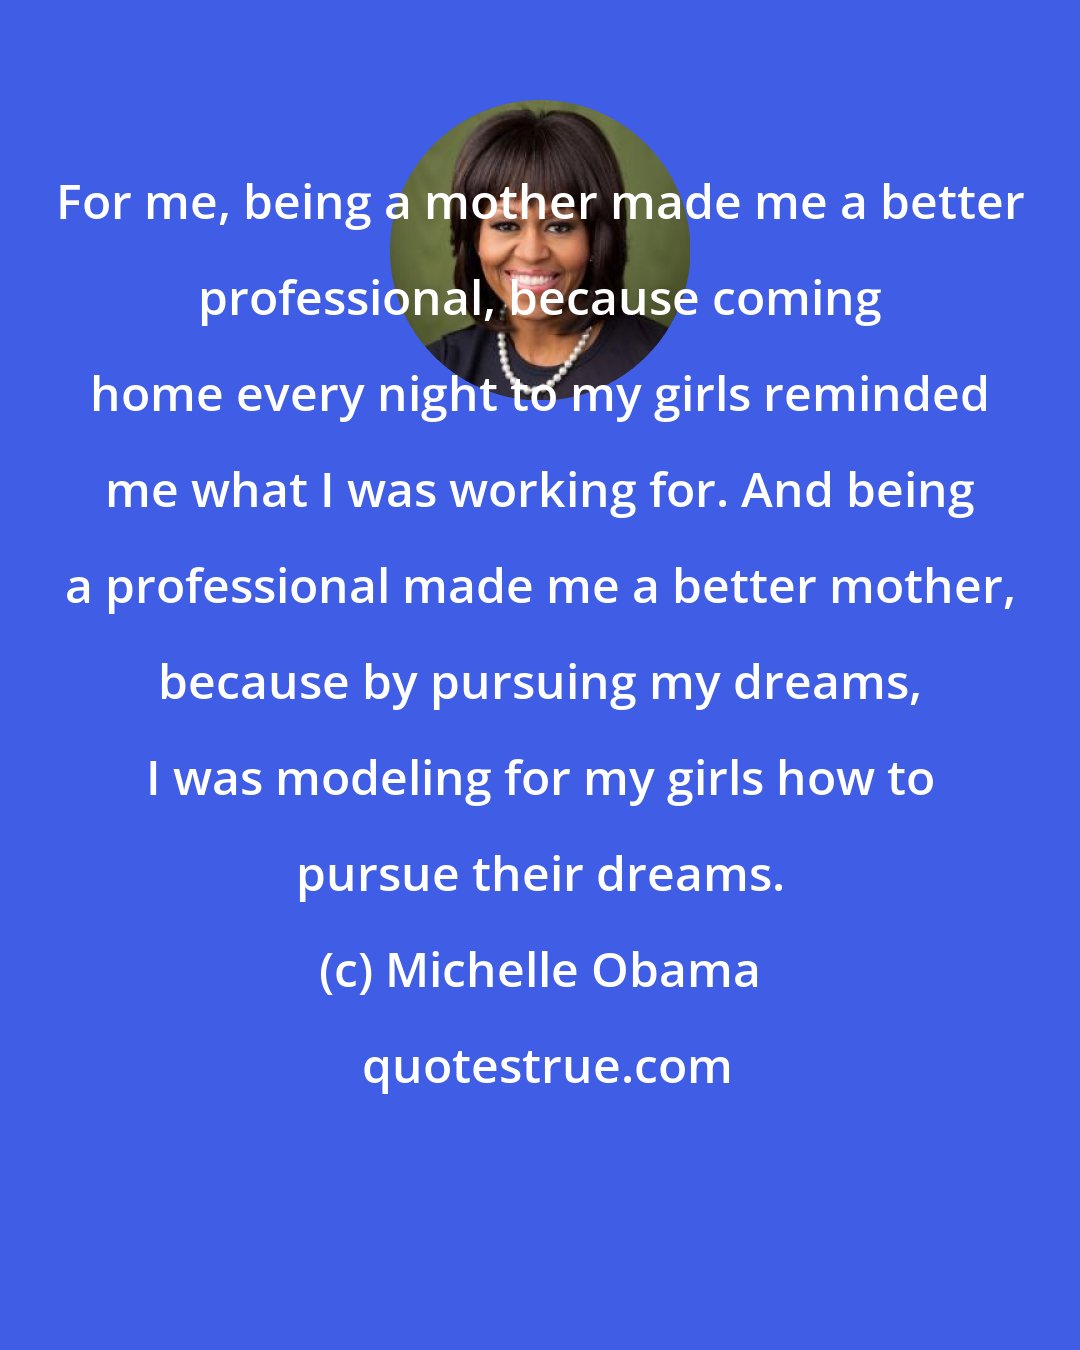 Michelle Obama: For me, being a mother made me a better professional, because coming home every night to my girls reminded me what I was working for. And being a professional made me a better mother, because by pursuing my dreams, I was modeling for my girls how to pursue their dreams.